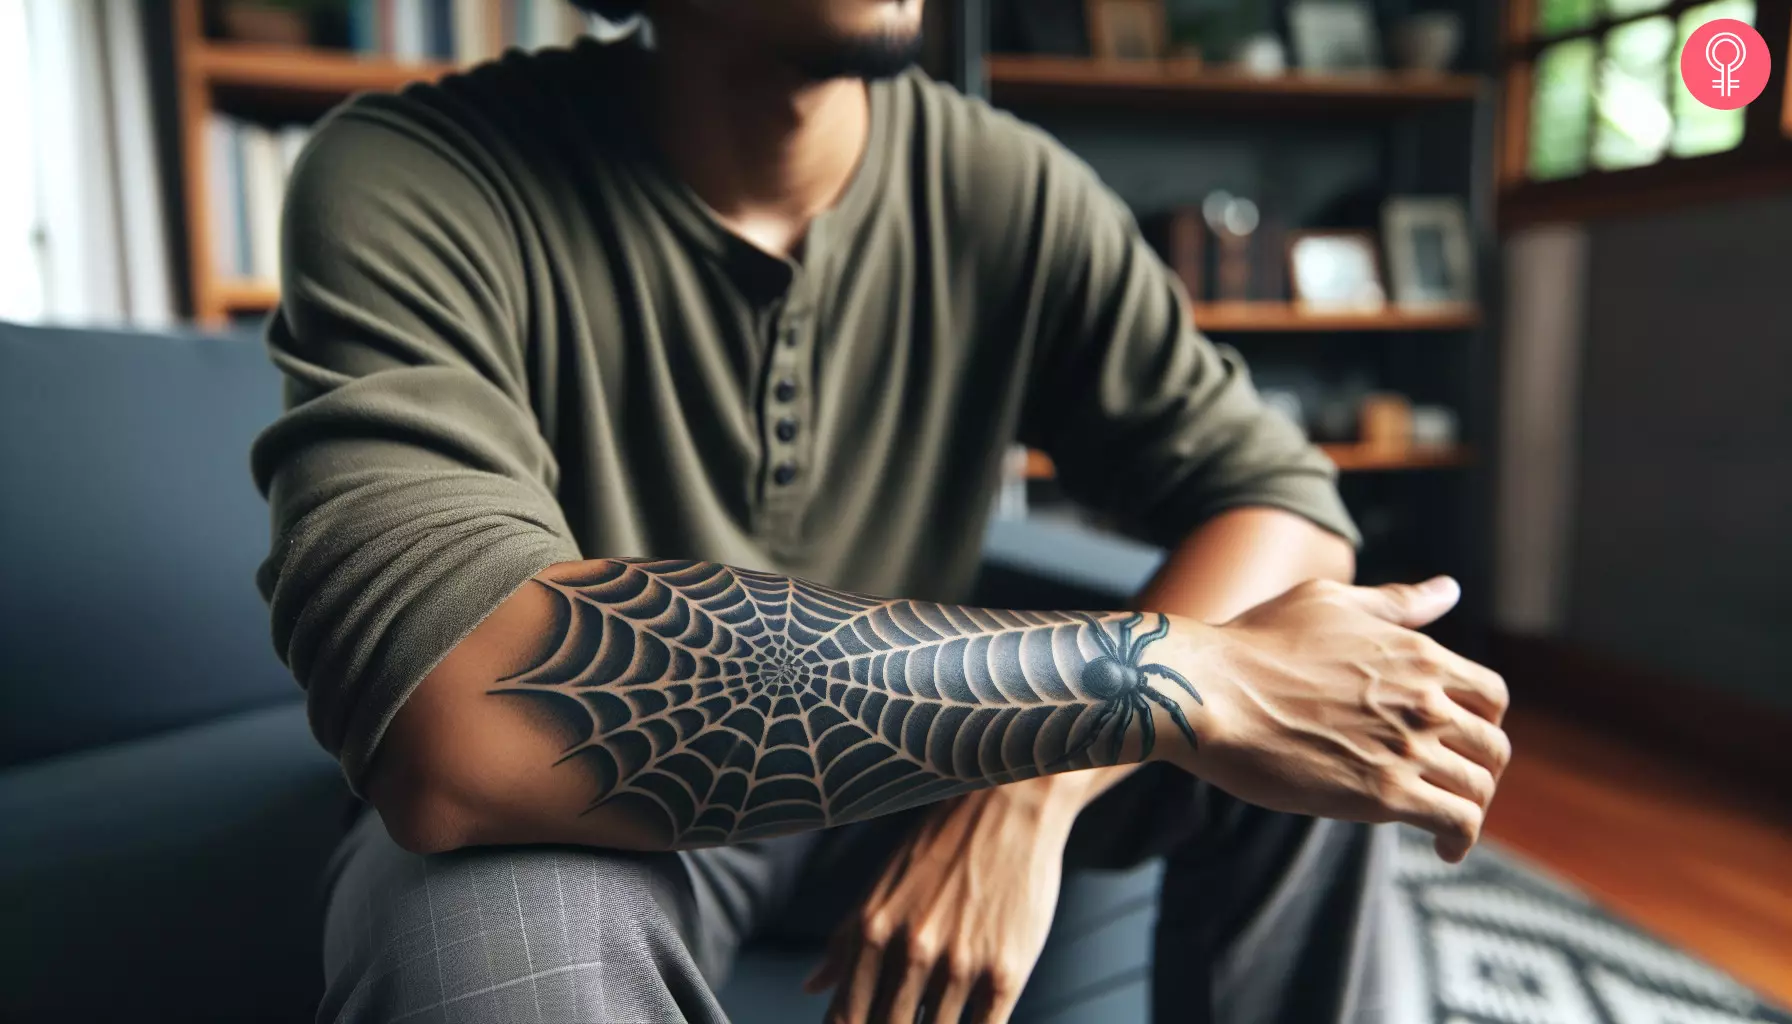 A man with a black spider tattoo on his arm